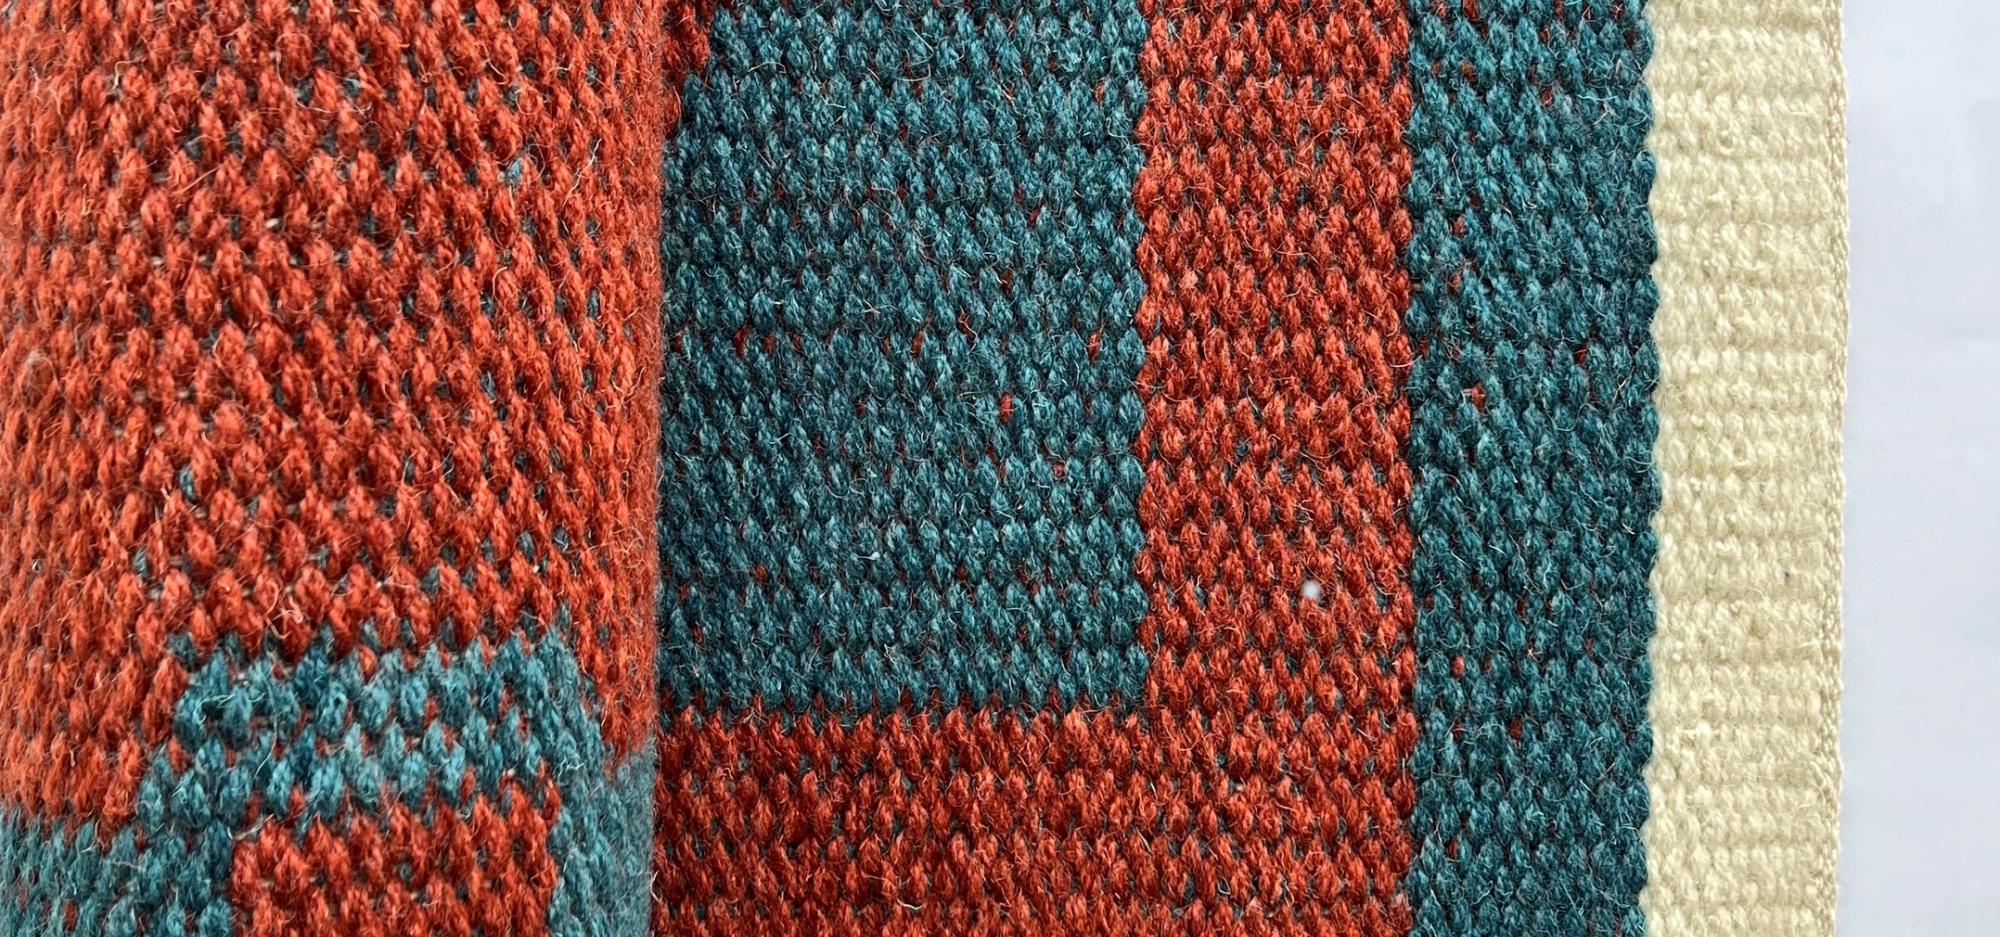 a close up of red and blue colour yarn weaved into a pattern